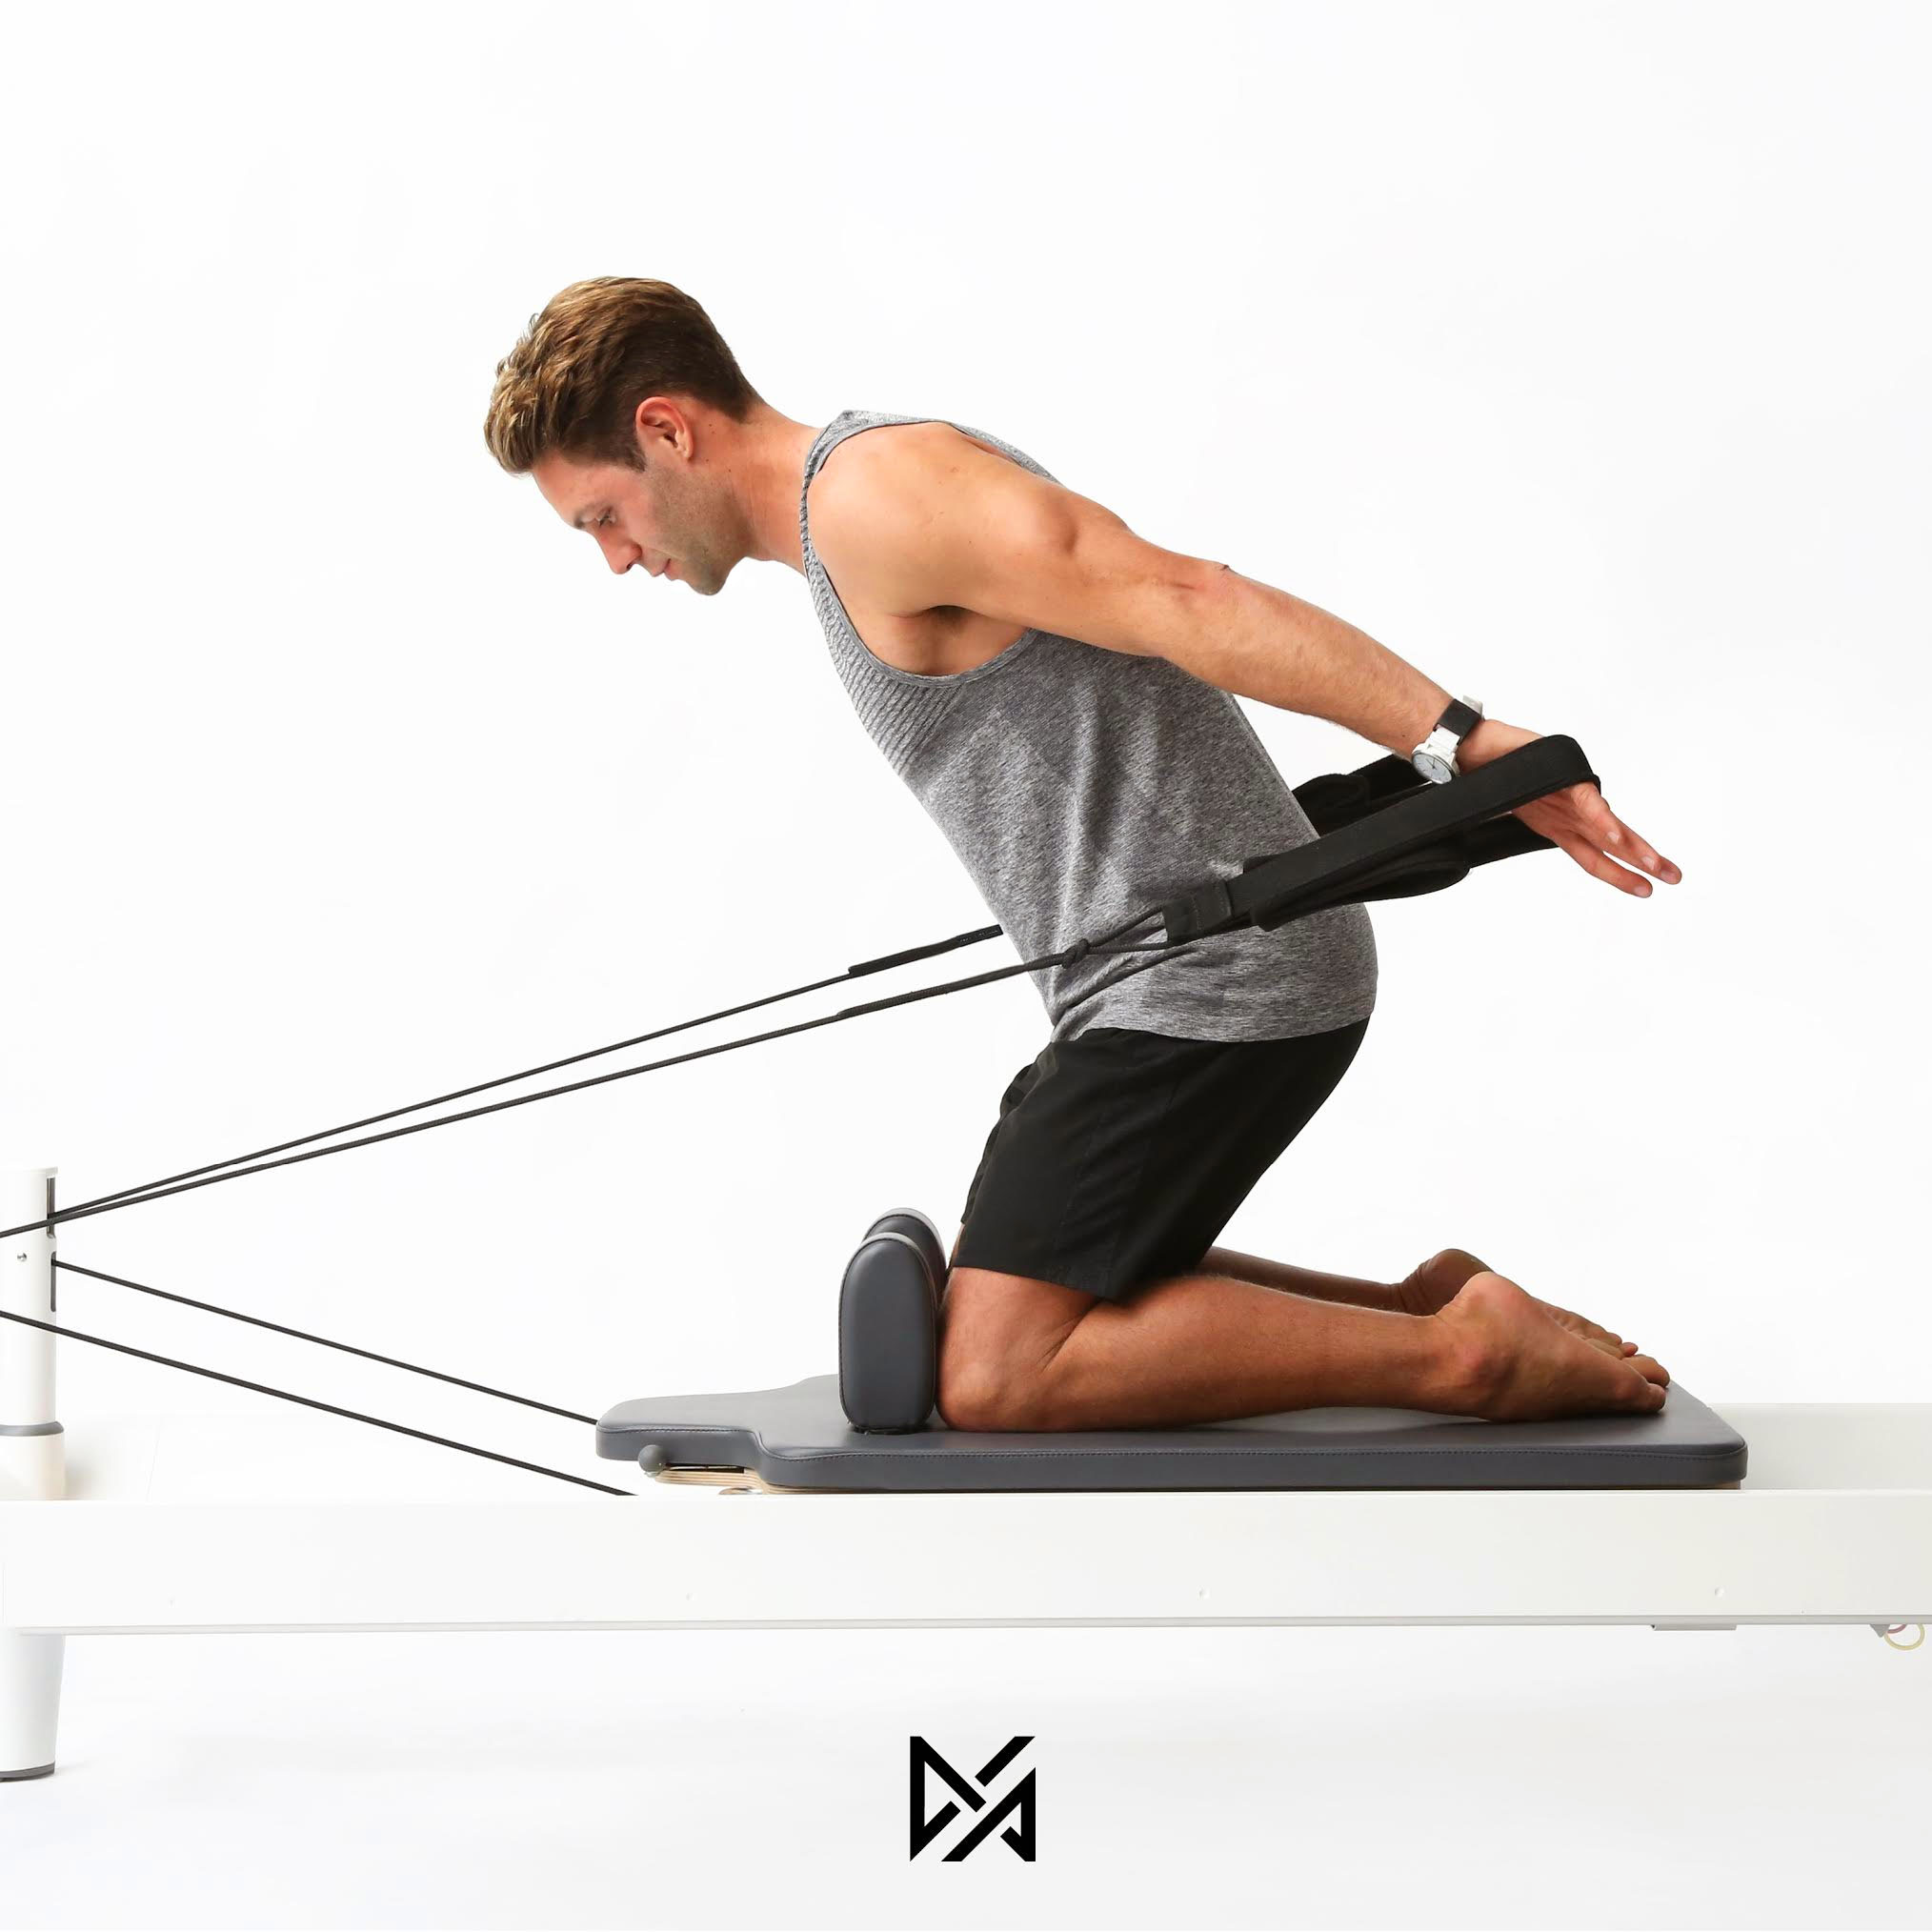 Pilates for Men: The Benefits and Best Exercises to Start With